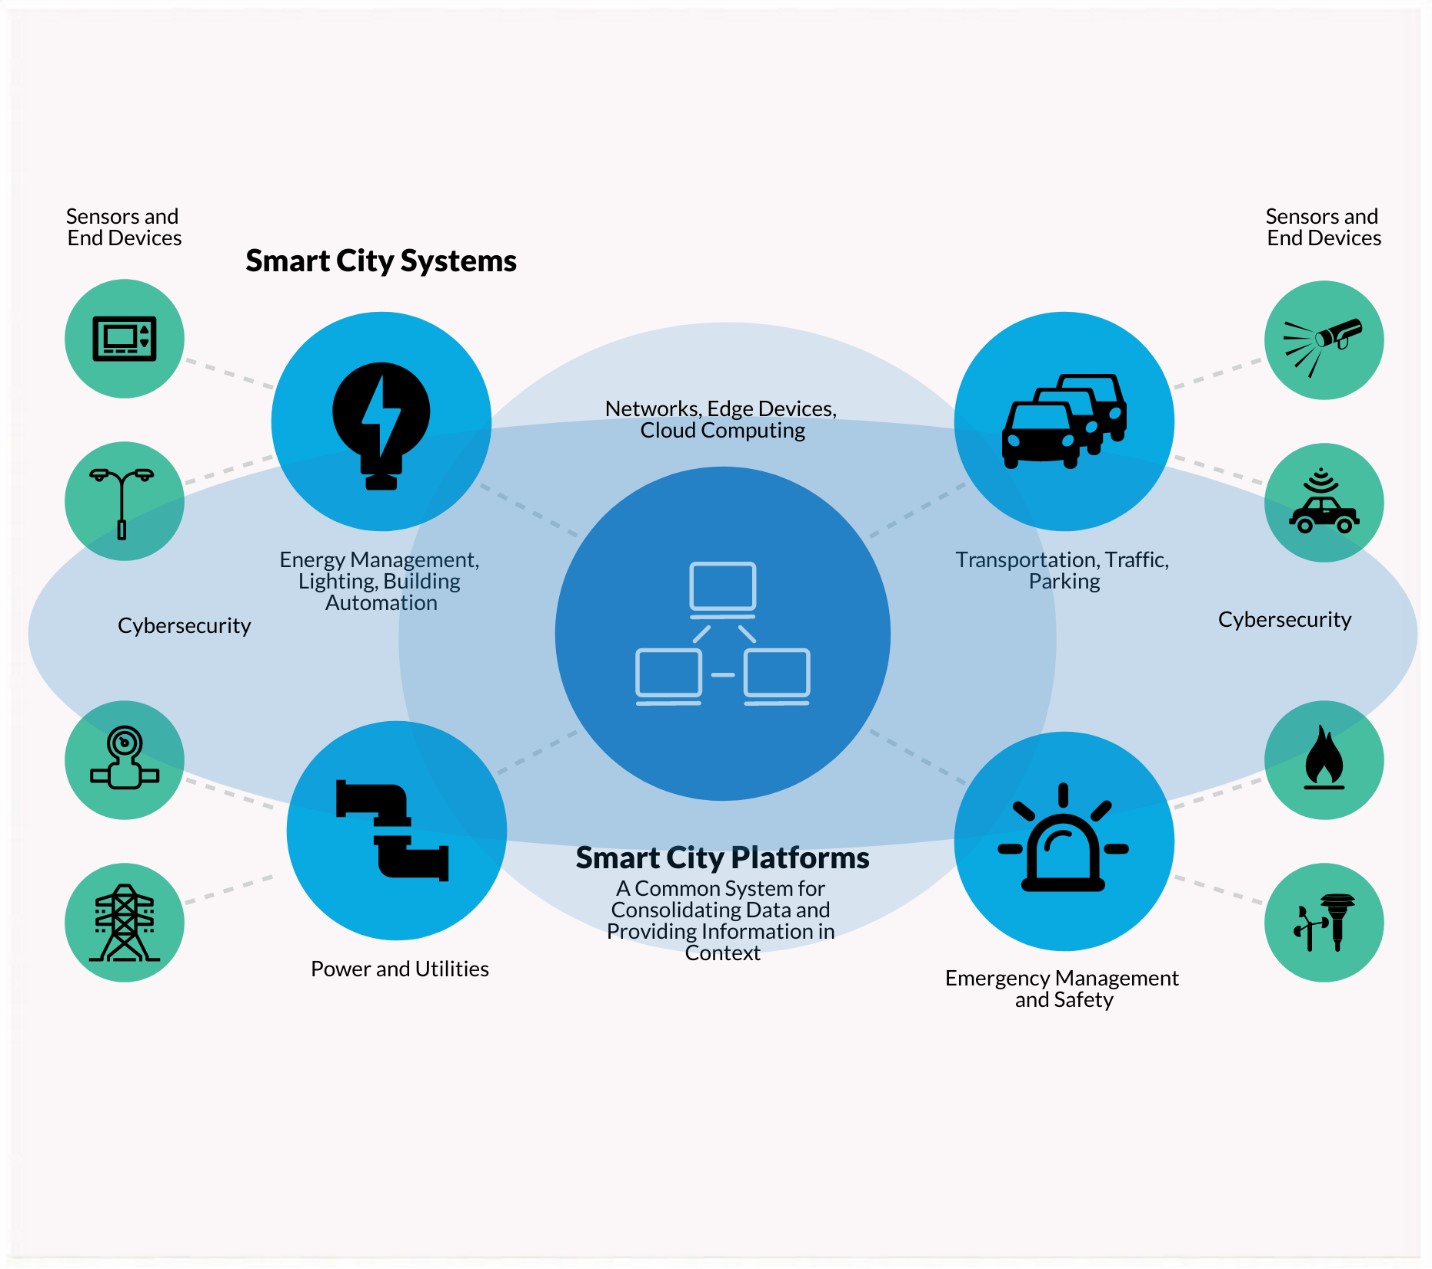 Smart City Platforms Provide a Common level of Abstraction and Manage Information from Multiple Smart City Systems